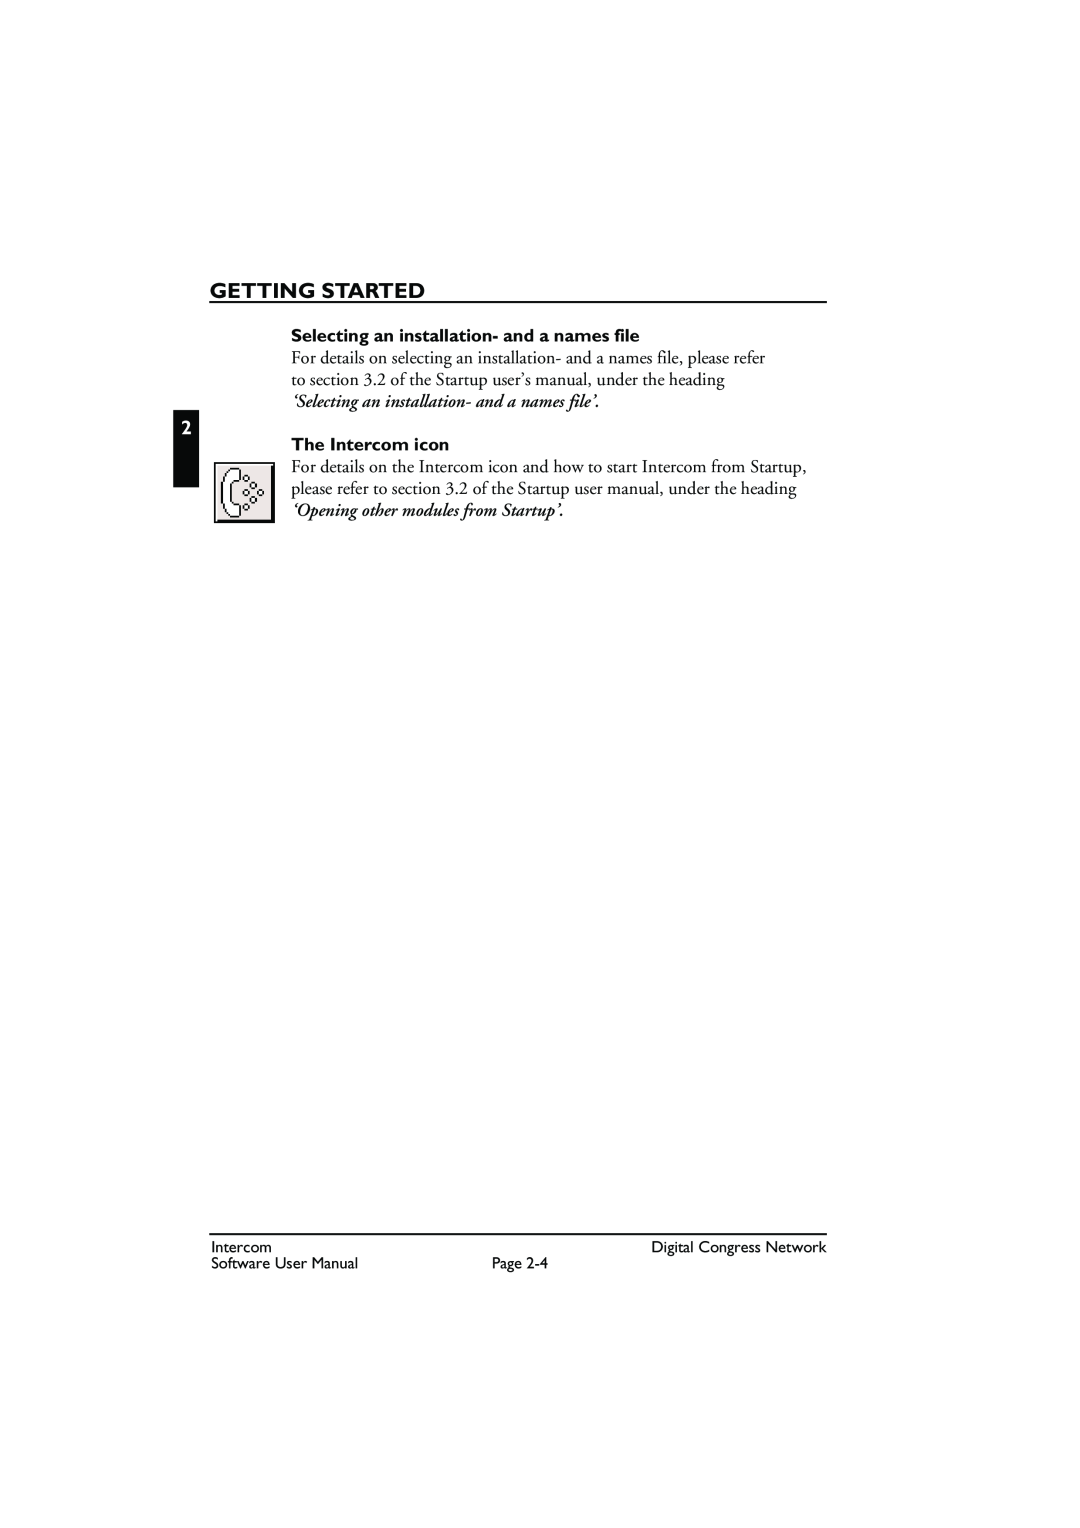 Bosch Appliances LBB 3573 user manual ‘Selecting an installation- and a names file’, The Intercom icon, Getting Started 